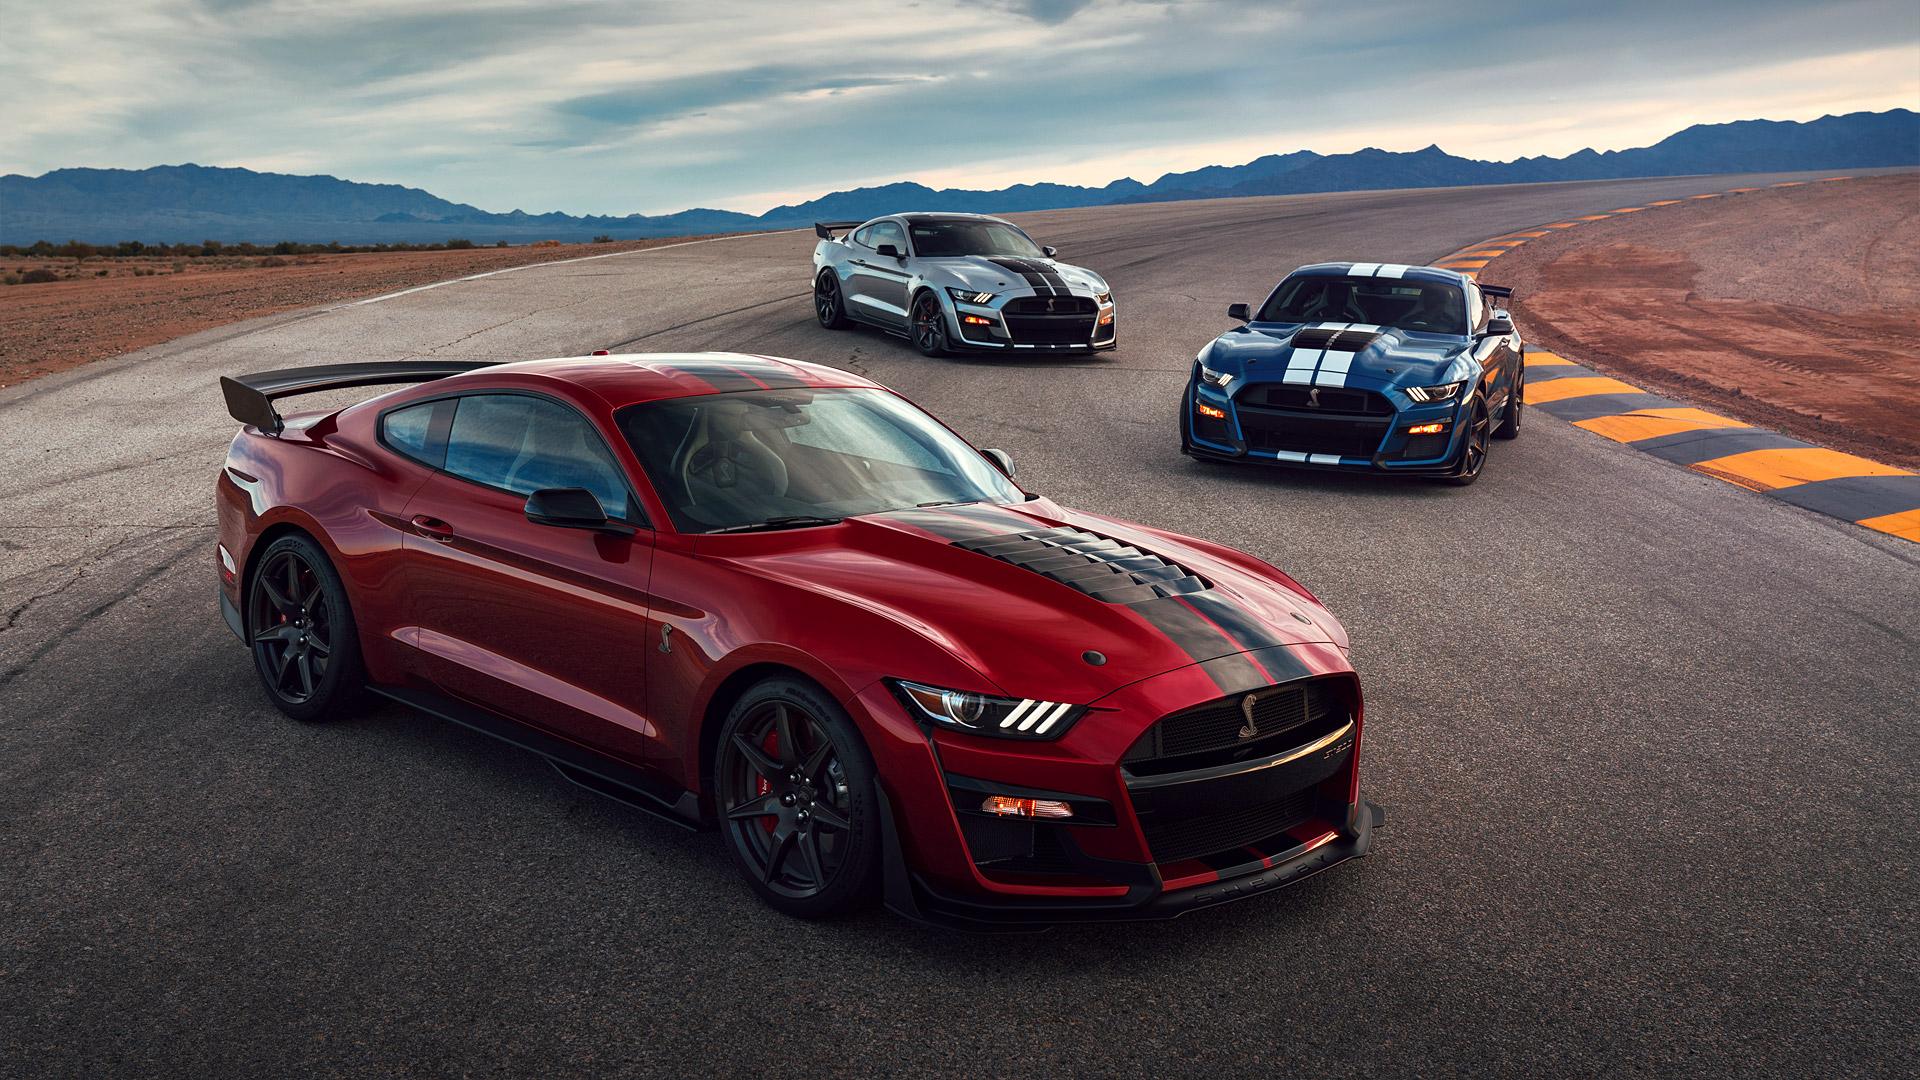 2020 Ford Mustang Shelby GT500 Wallpapers, Specs & Videos